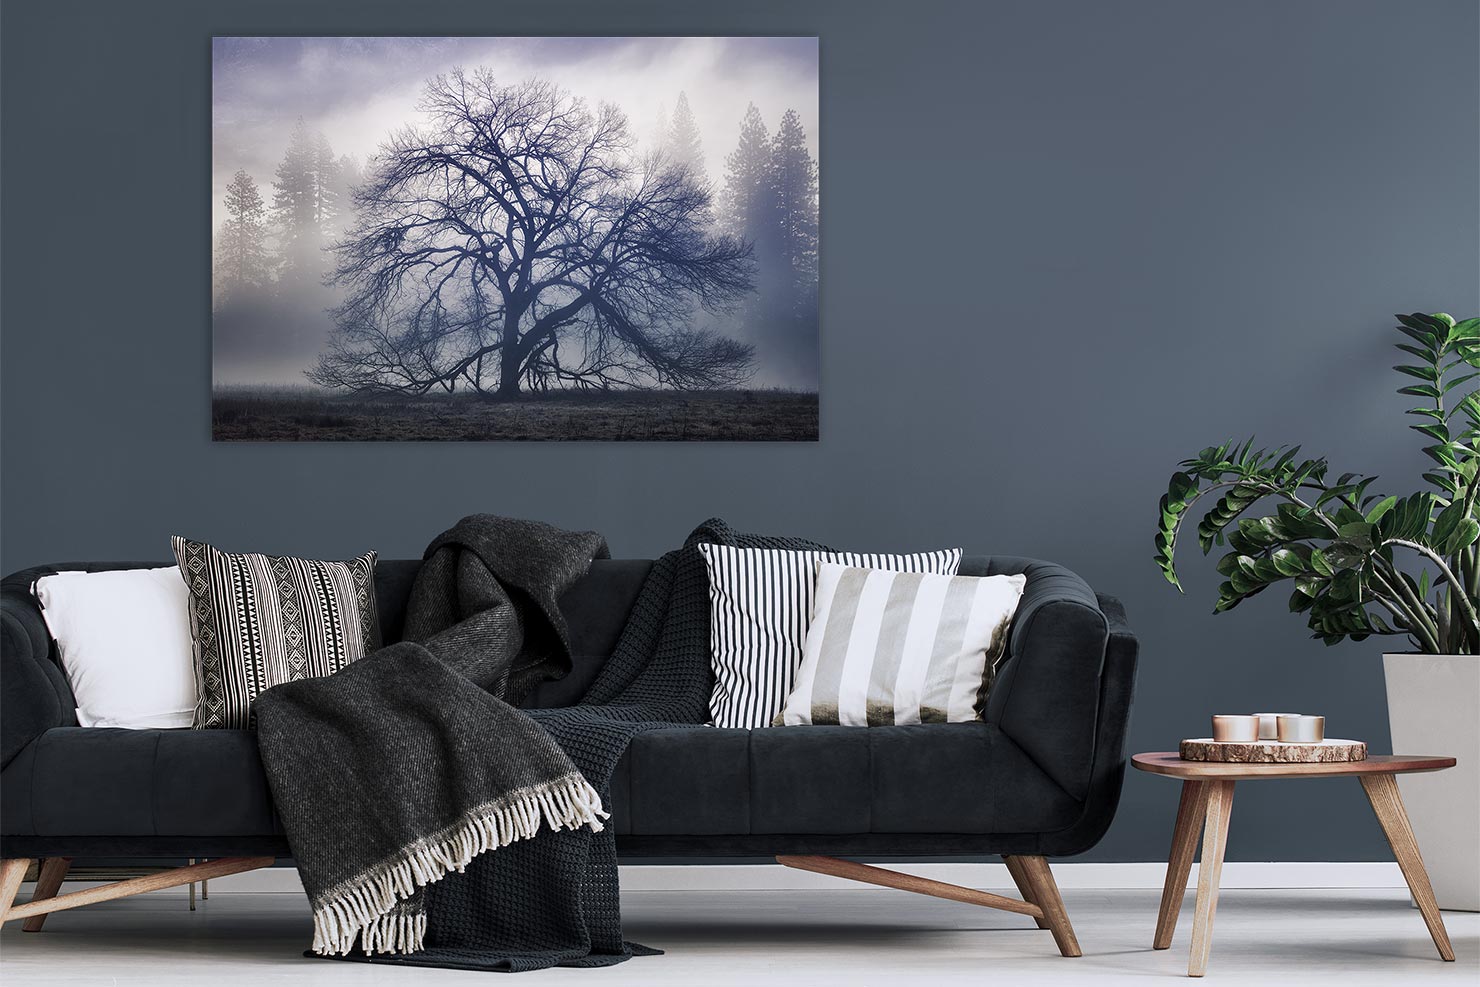 The Faraway Tree Room View Paul Reiffer Fine Art Limited Edition Photograph Print